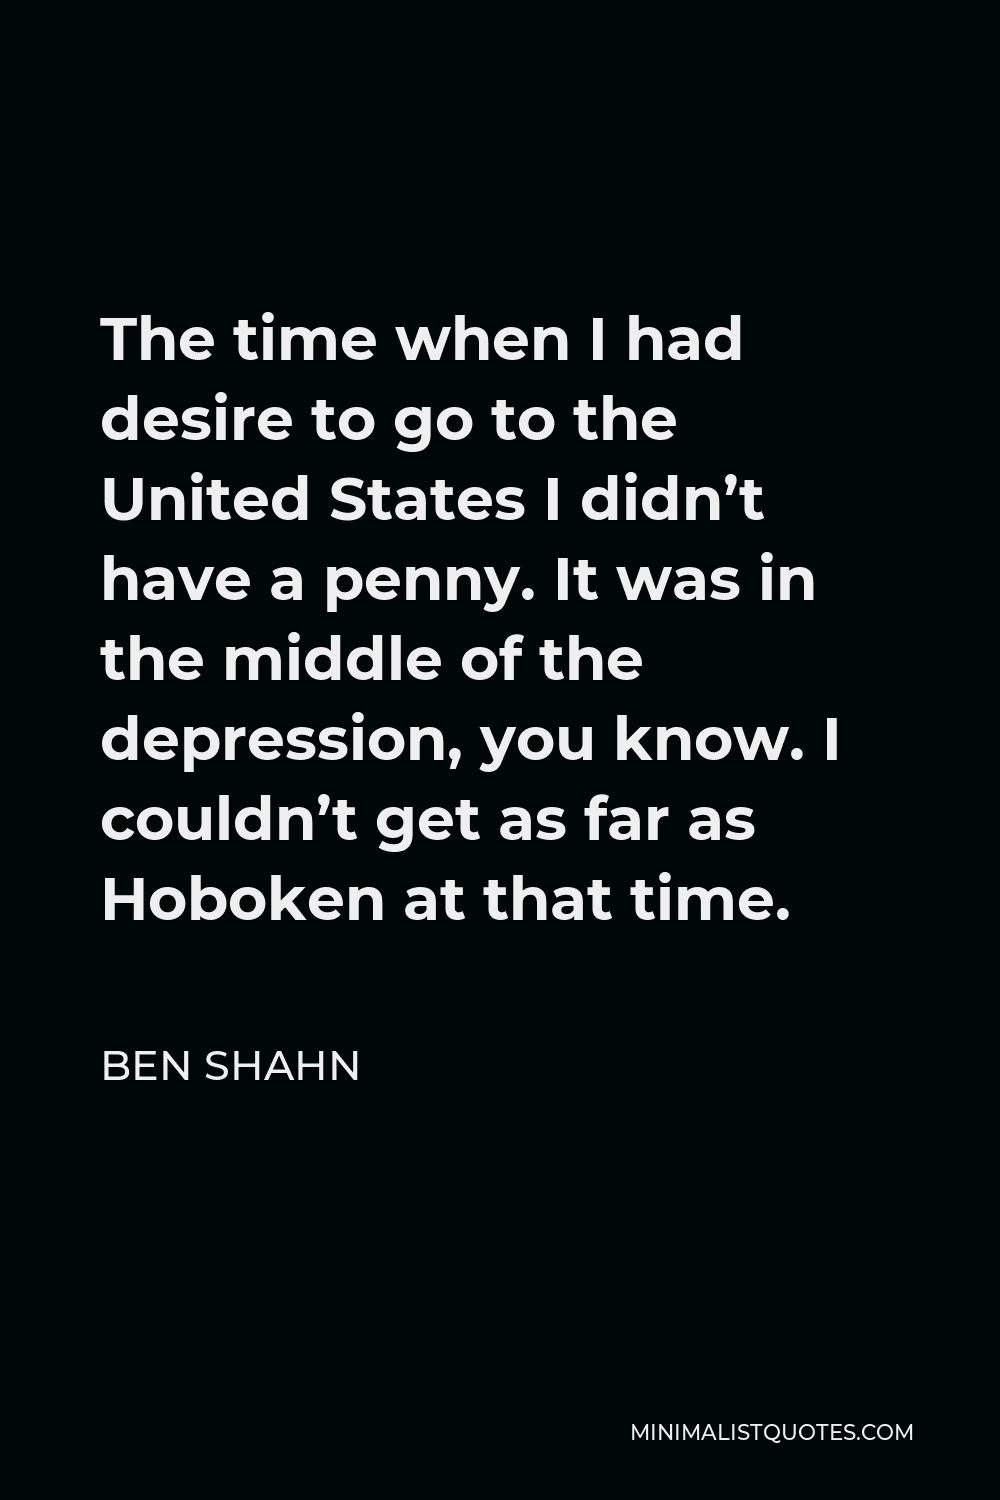 Ben Shahn Quote - The time when I had desire to go to the United States I didn’t have a penny. It was in the middle of the depression, you know. I couldn’t get as far as Hoboken at that time.